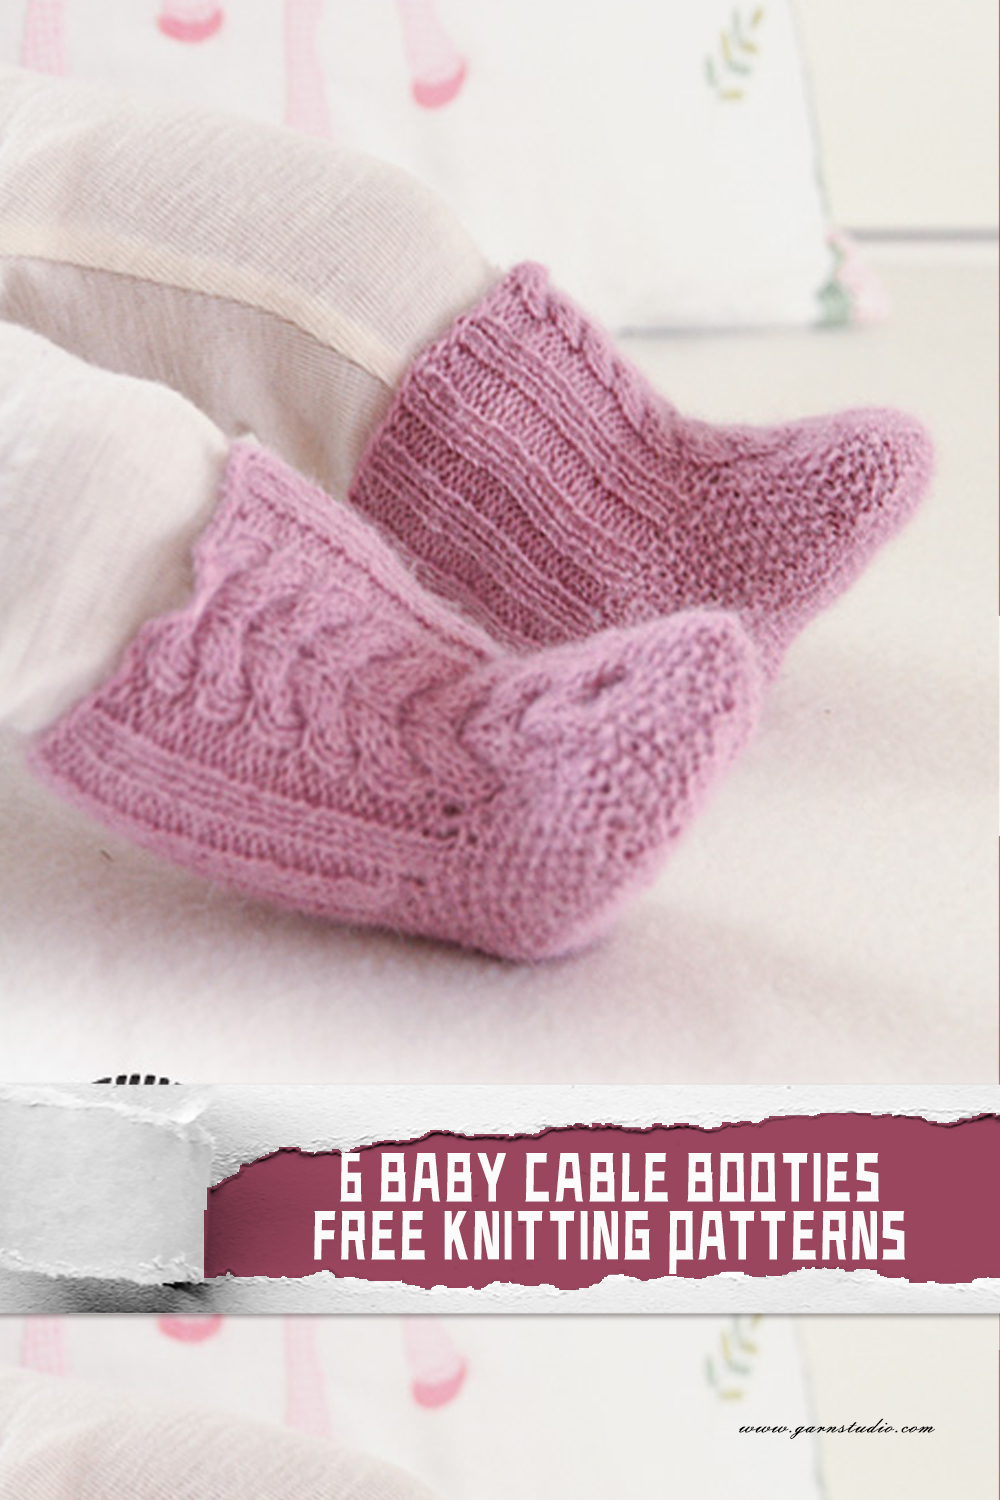 6 Cozy Knitting Patterns for Baby Cable Booties - iGOODideas.com